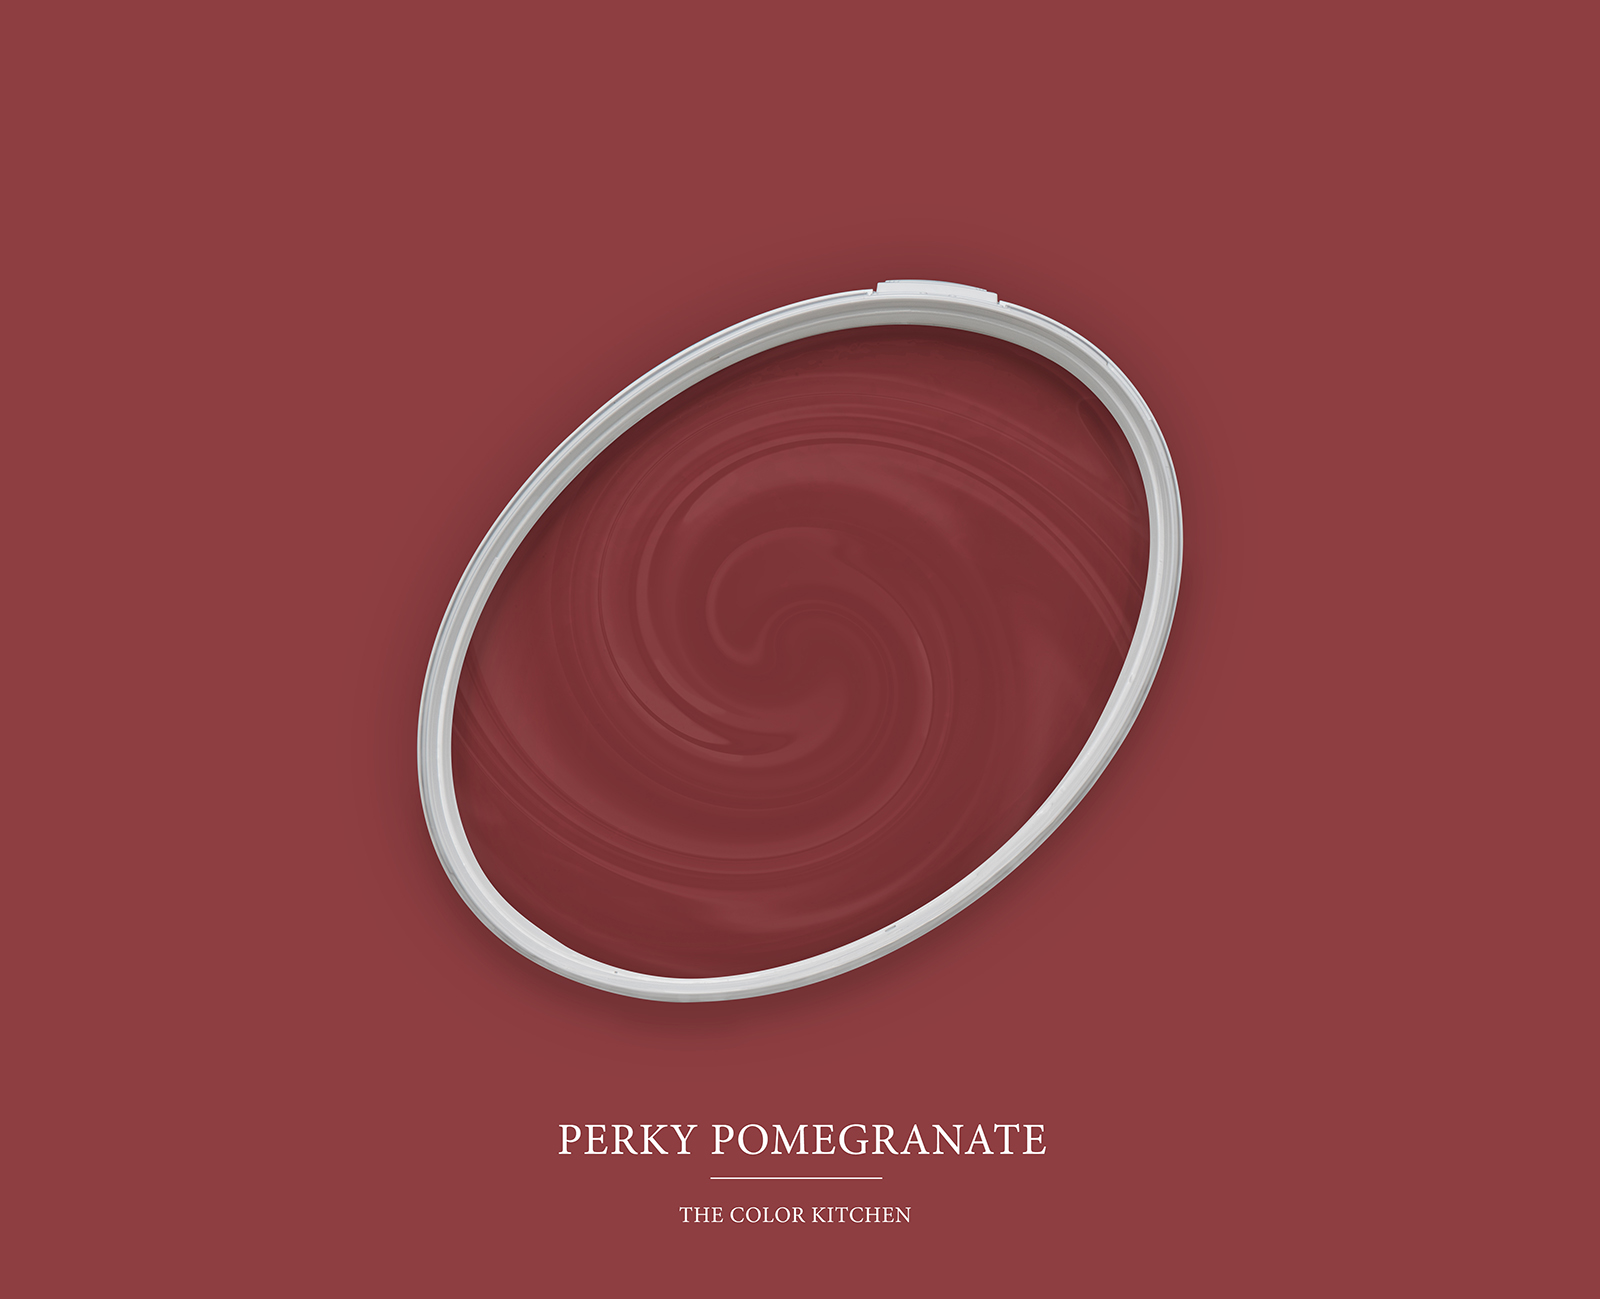         Wall Paint TCK7006 »Perky Pomegranate« in passionate dark red – 2.5 litre
    